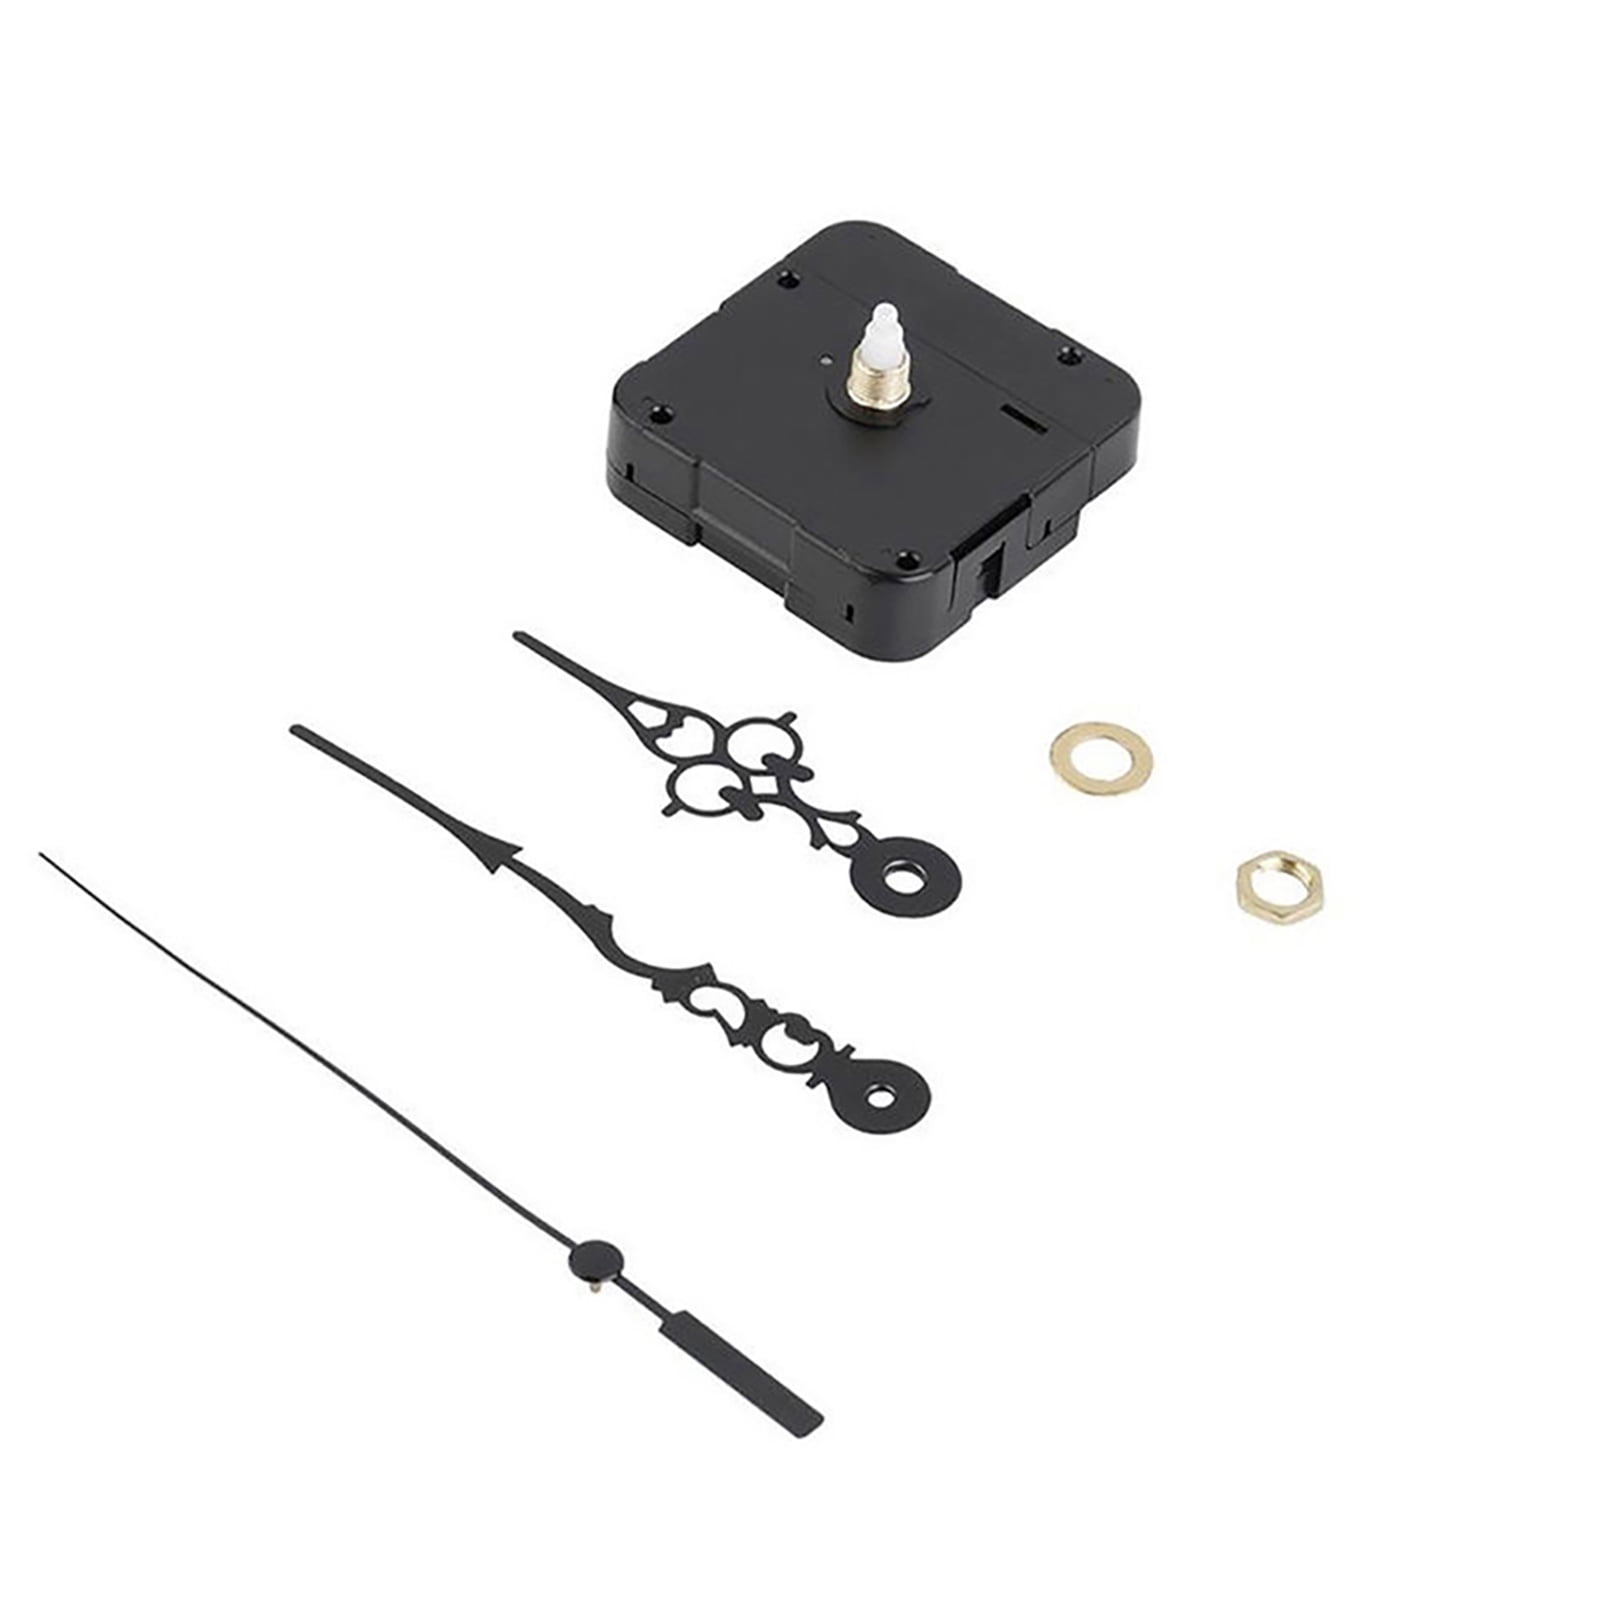 Details about   Silent Wall Clock Movement Replacement Repair Tool Kit Cross-Stitch DIY Tool US 